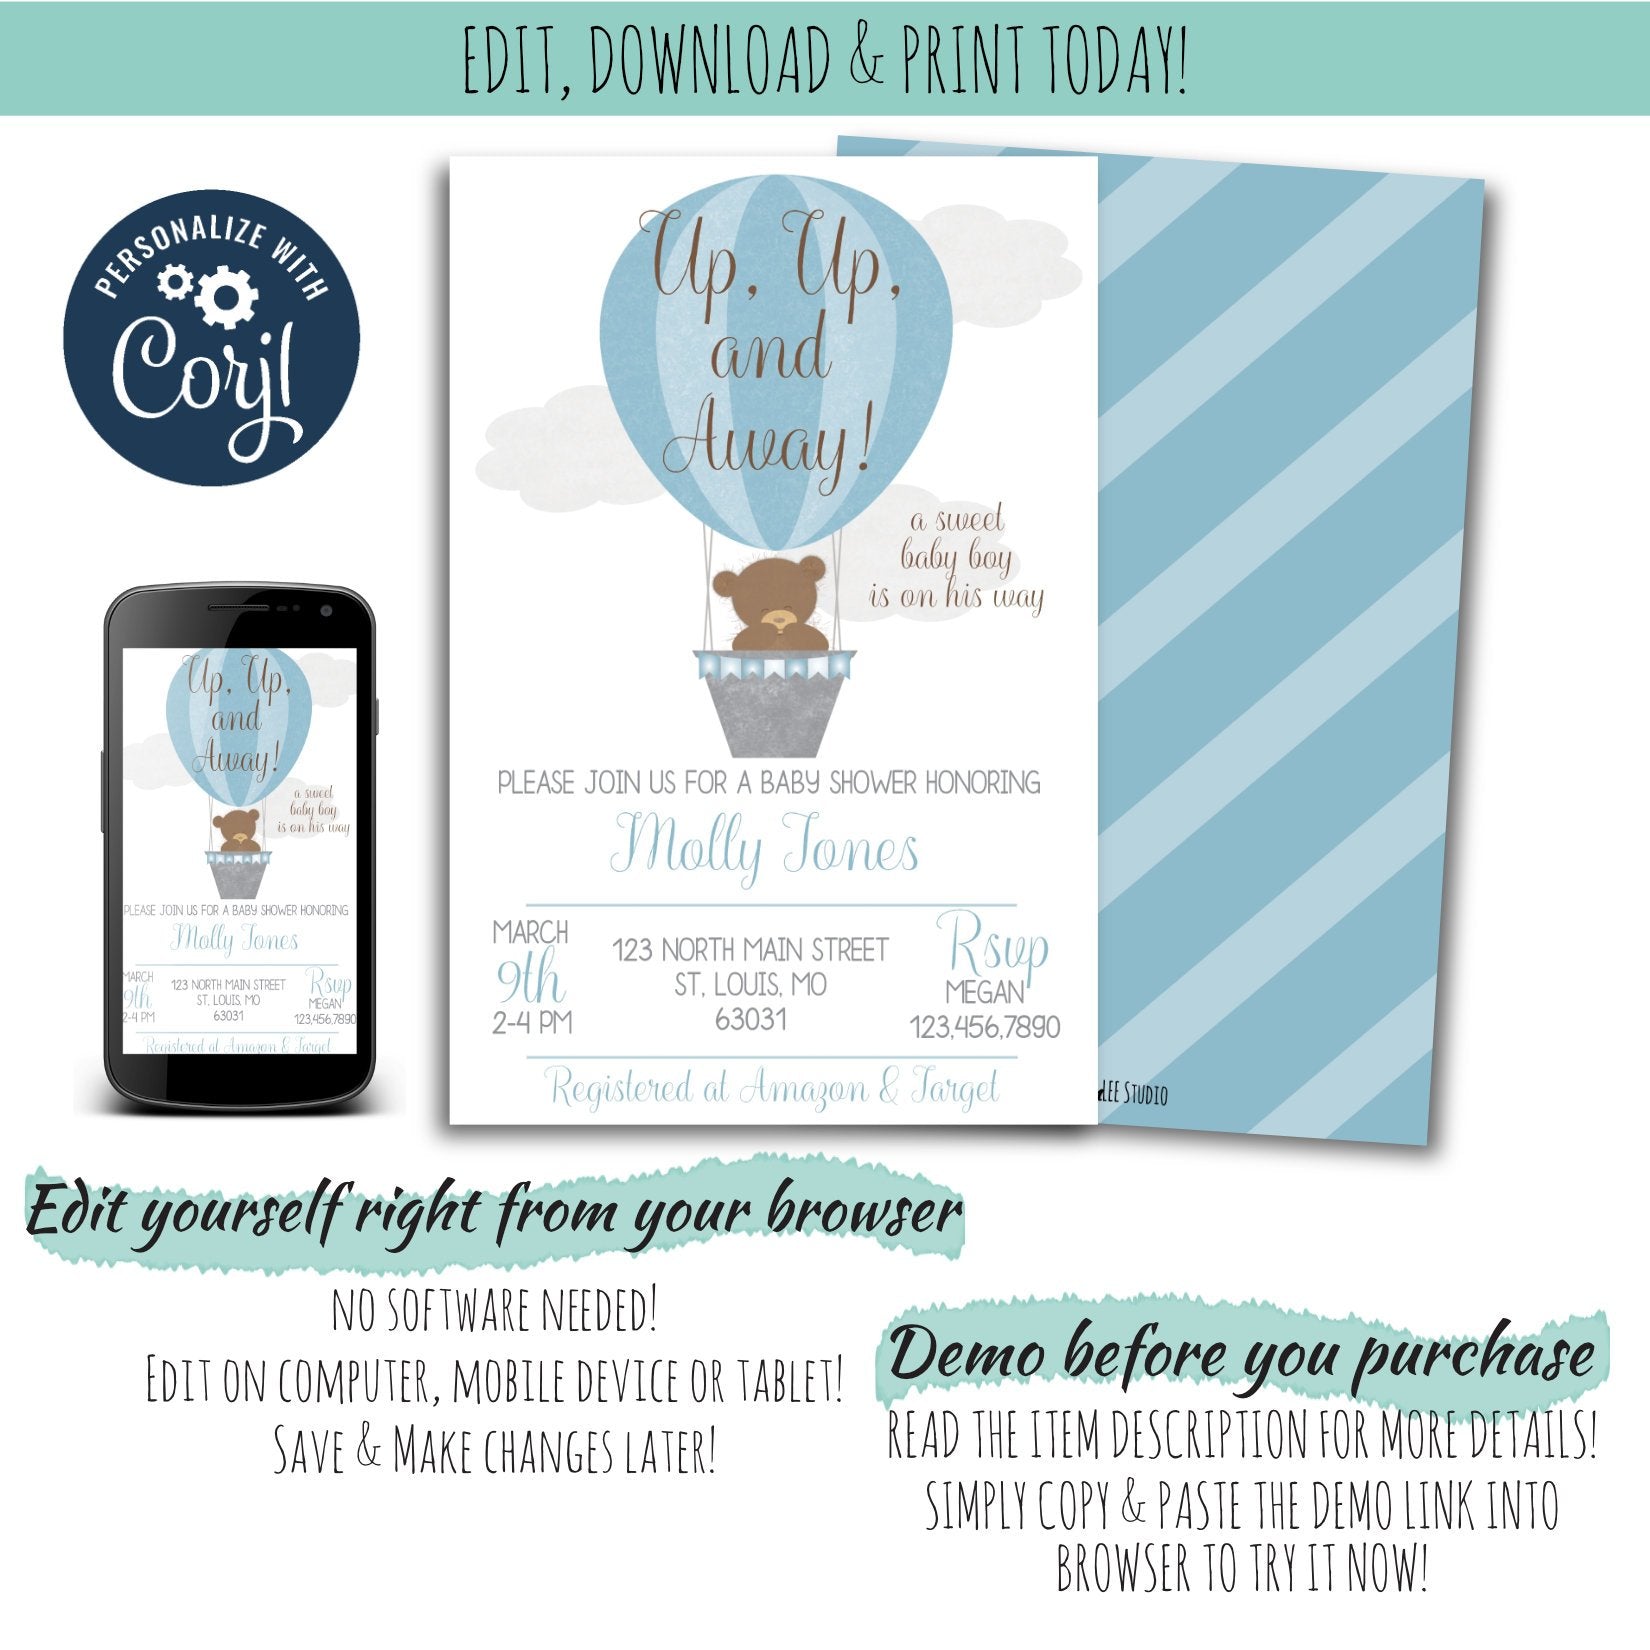 Hot Air Balloon Baby Shower Invitation For a Boy |  Up, Up, & Away Baby Shower Party Package, Baby Shower, designLEE Studio, designLEE Studio